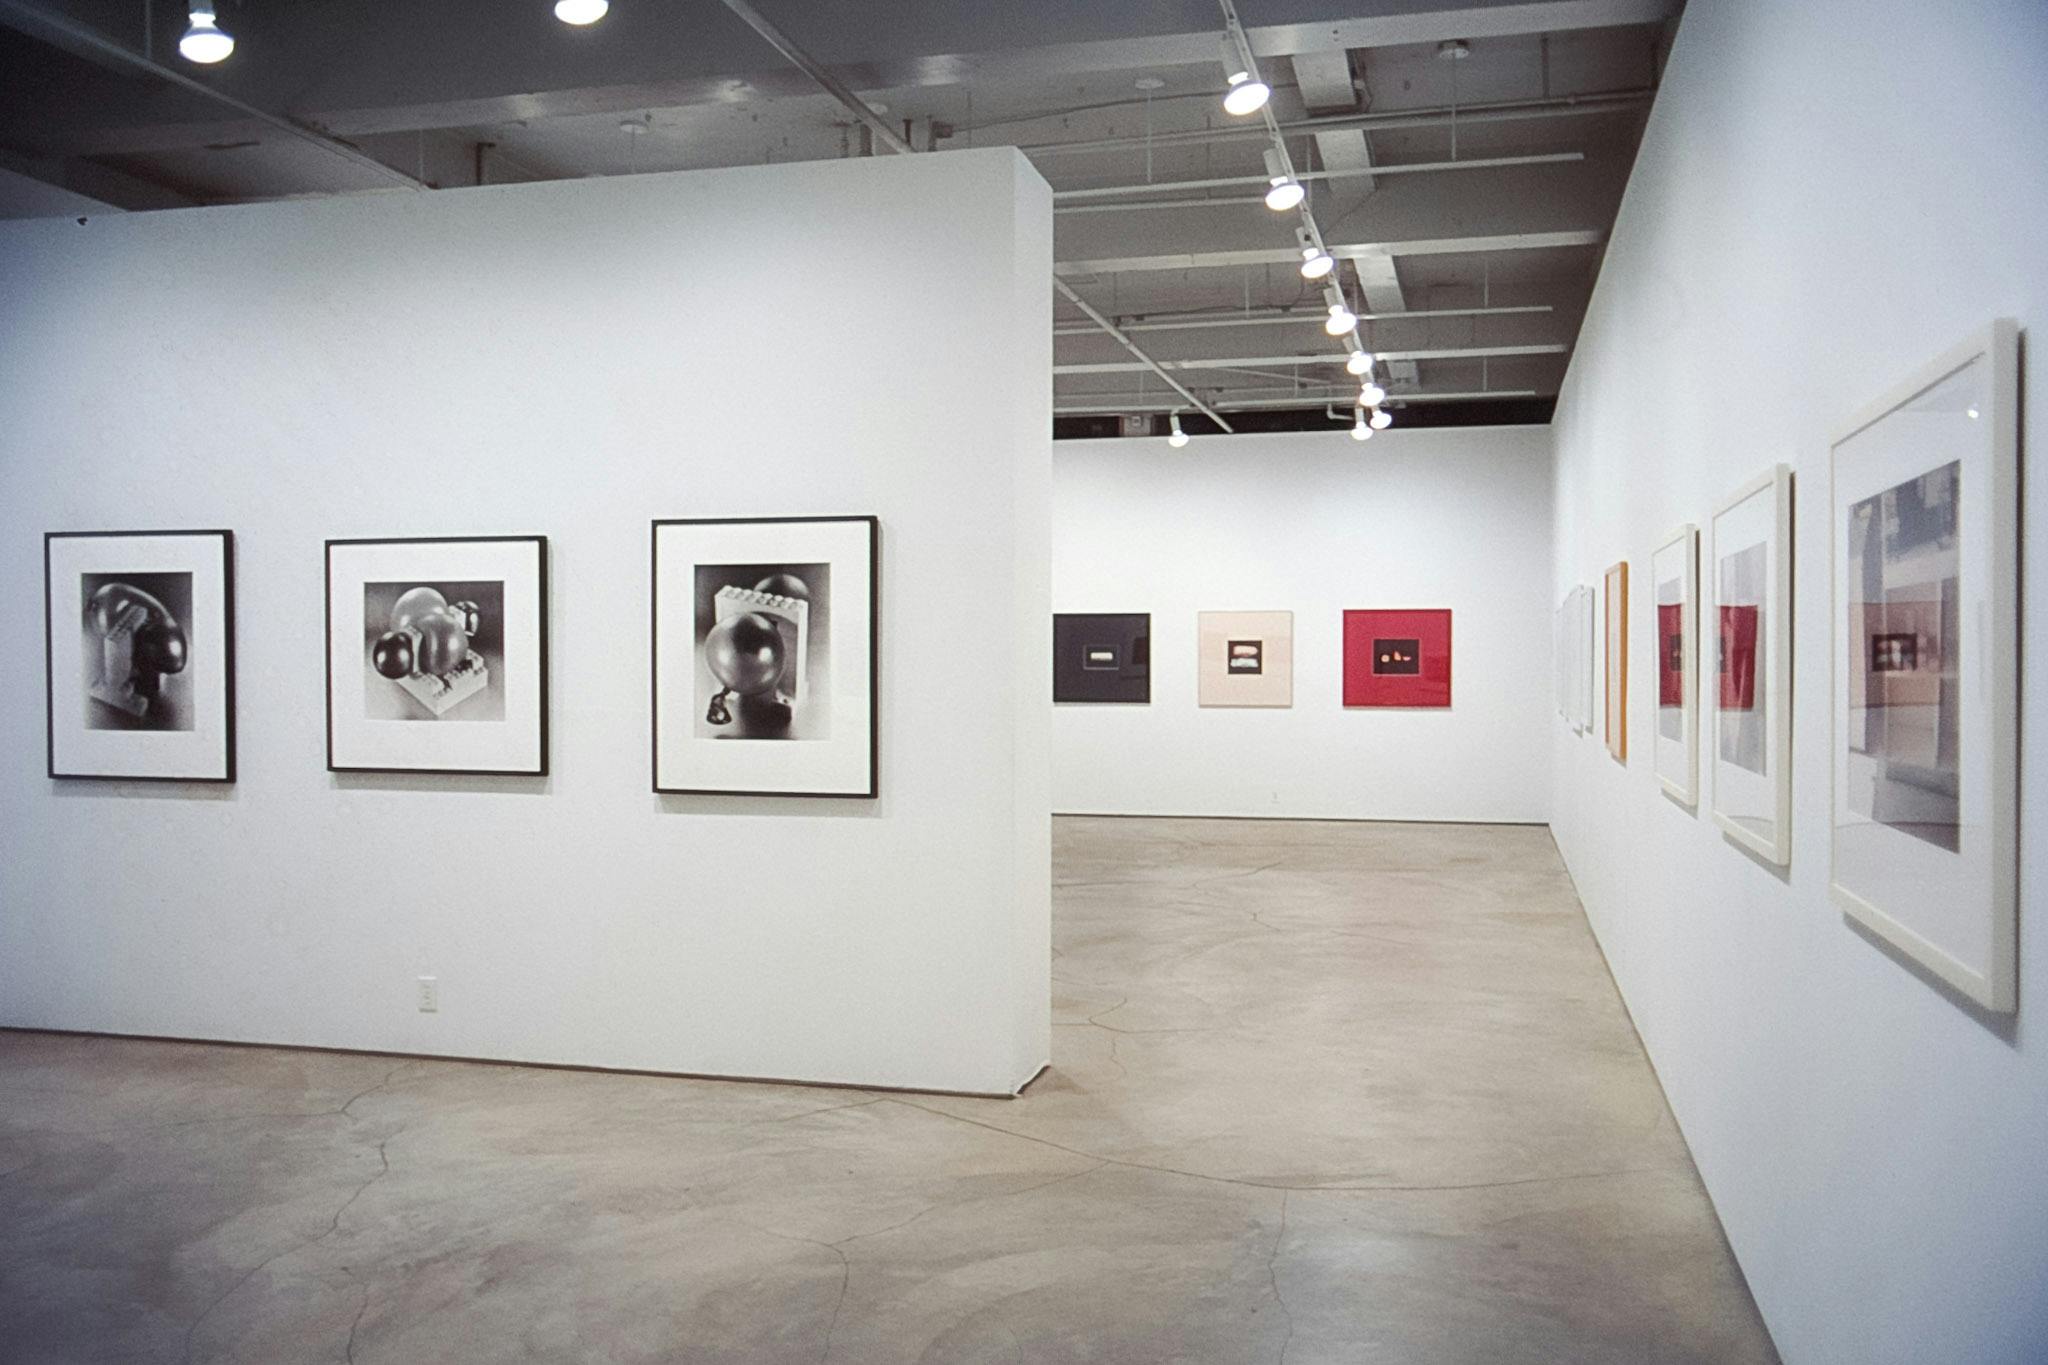 Eleven art pieces mounted on three gallery walls are visible in this image. Three black and white photographs on the front wall depict silver organic shapes being attached to the white blocks. 